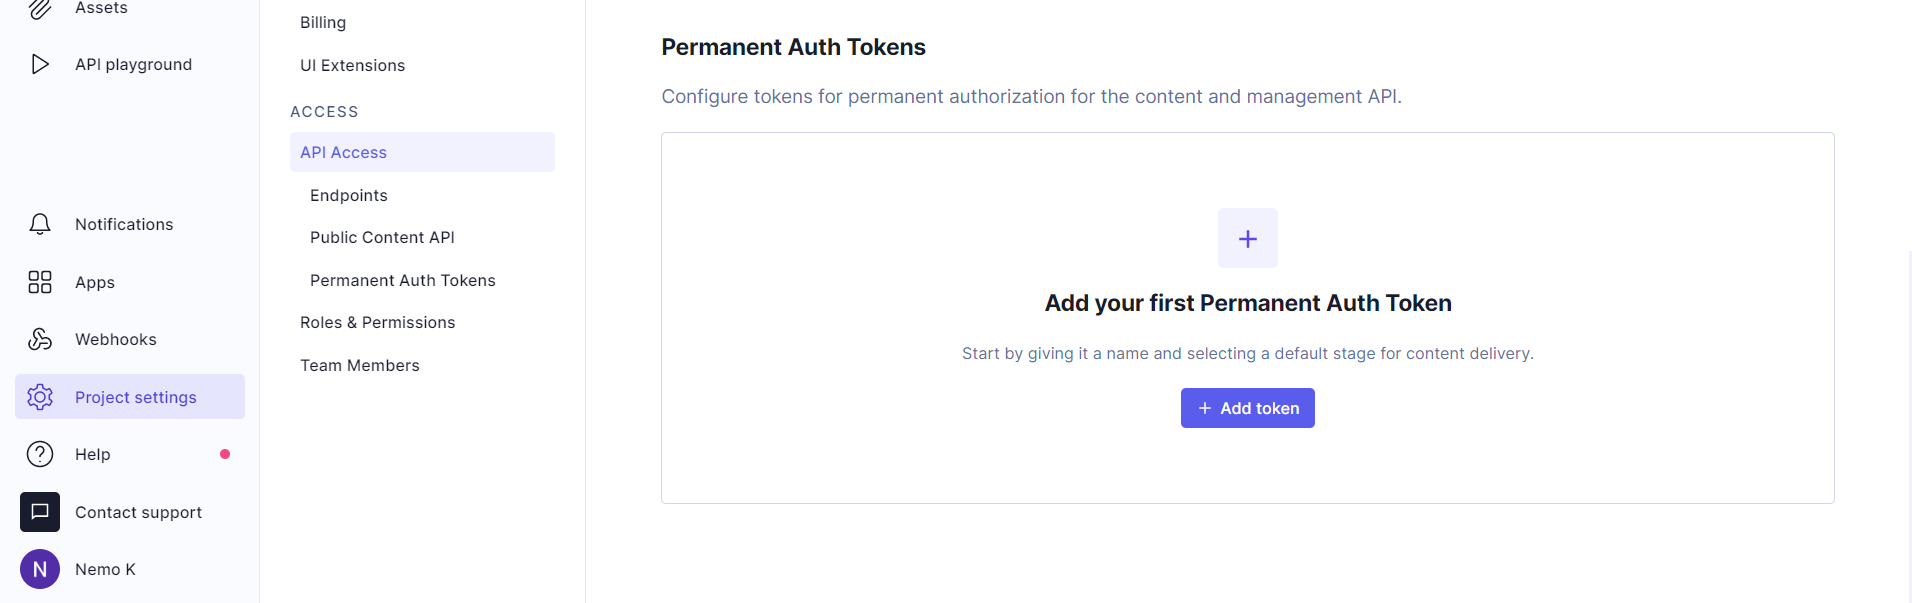 Adding a permanent auth token